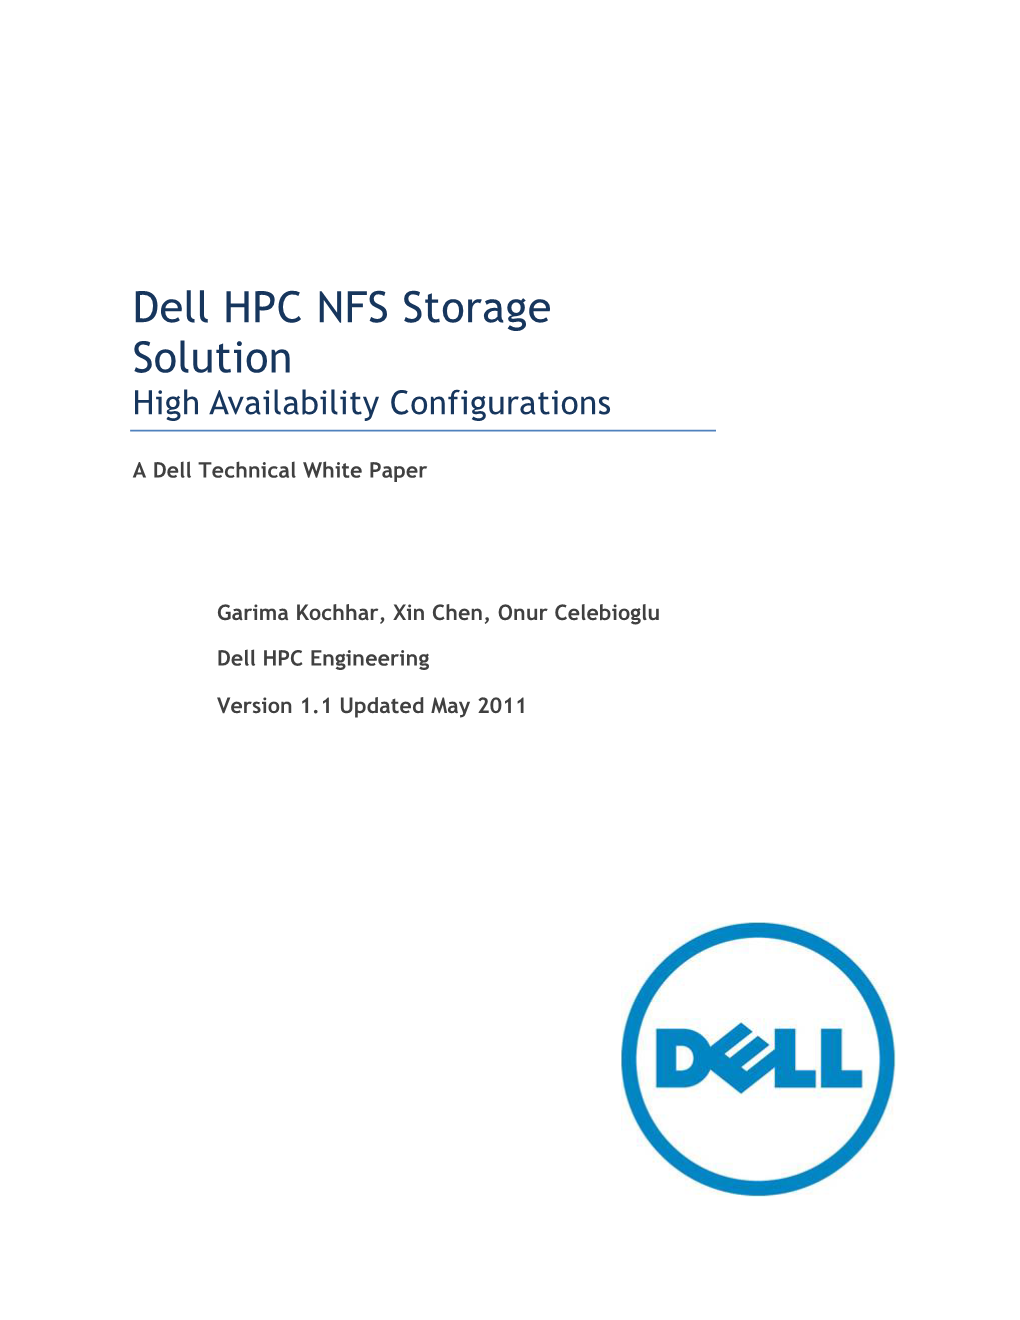 Dell HPC NFS Storage Solution (NSS) High Availability Configurations